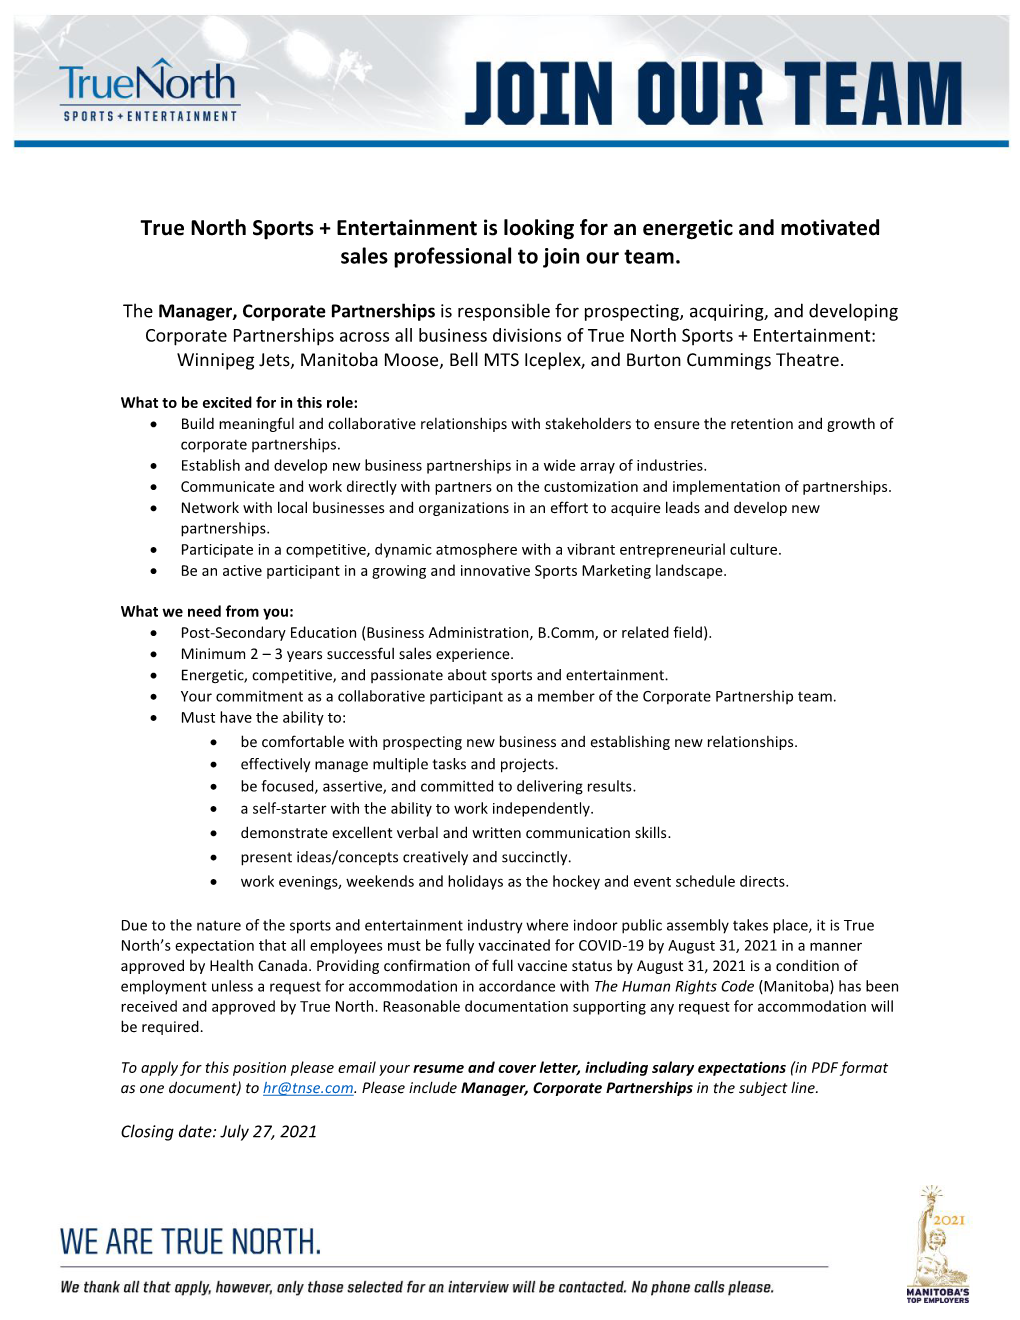 True North Sports + Entertainment Is Looking for an Energetic and Motivated Sales Professional to Join Our Team